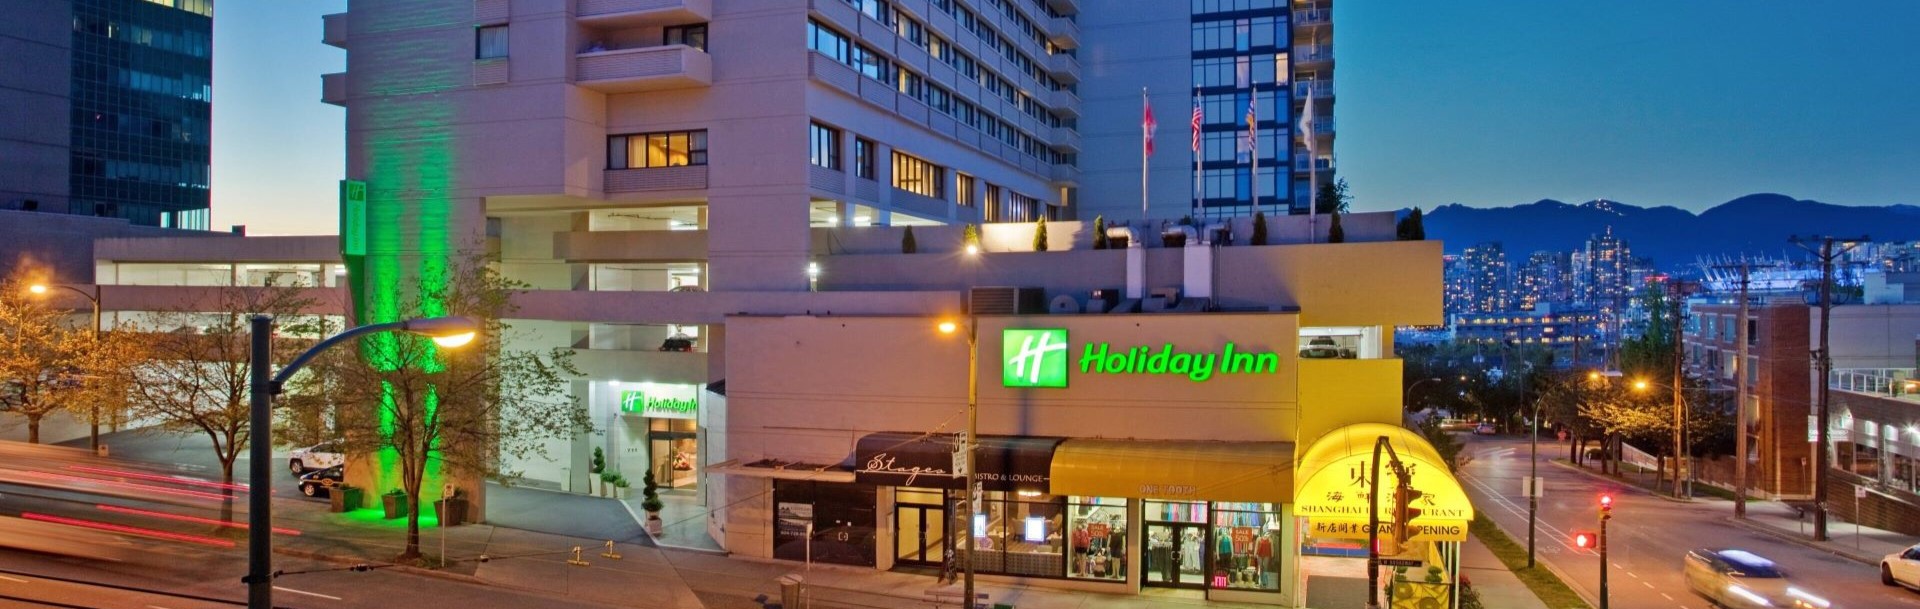 Holiday Inn Vancouver Centre, Vancouver